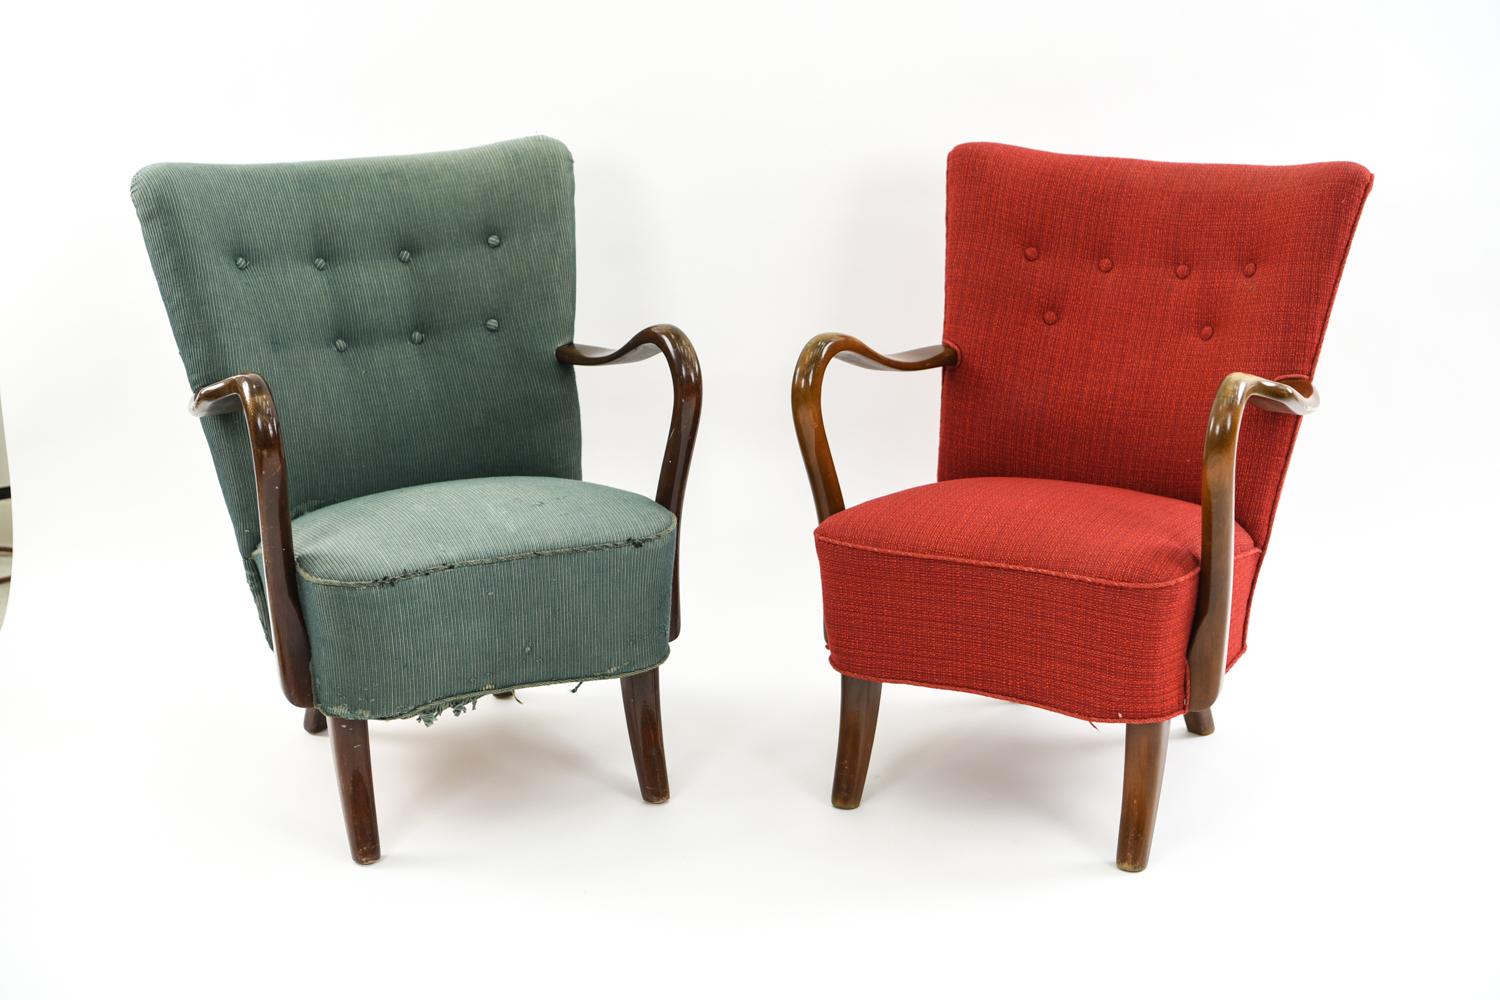 A pair of Danish midcentury easy chairs by Slagelse.